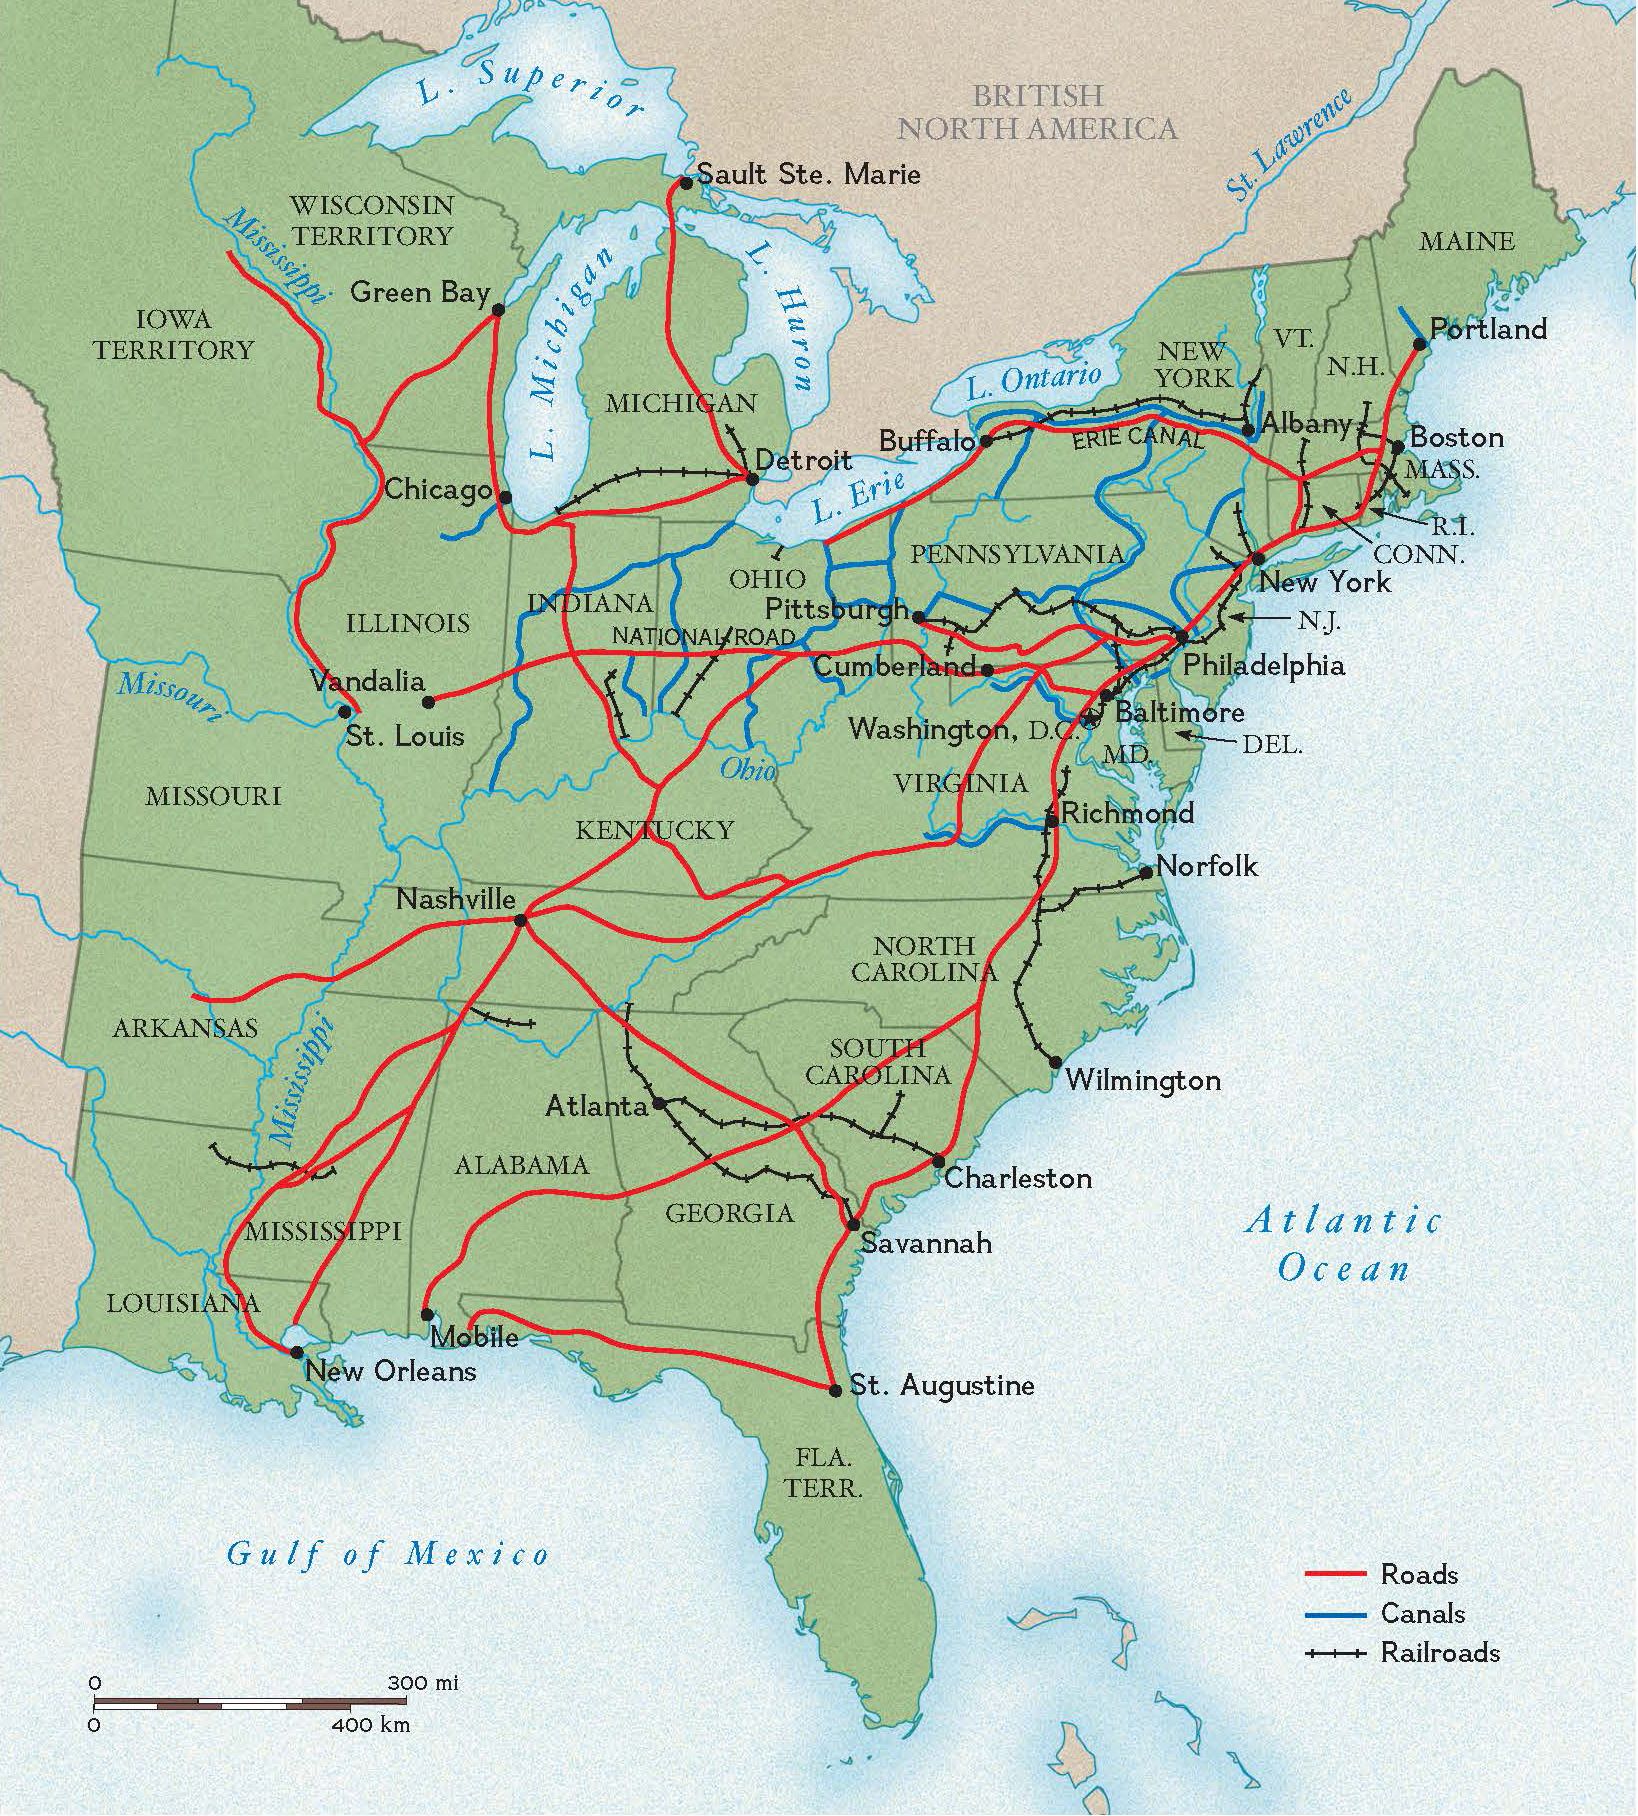 The Significance of the Cumberland Road in the 19th Century: A Key Transportation Route That Shaped America